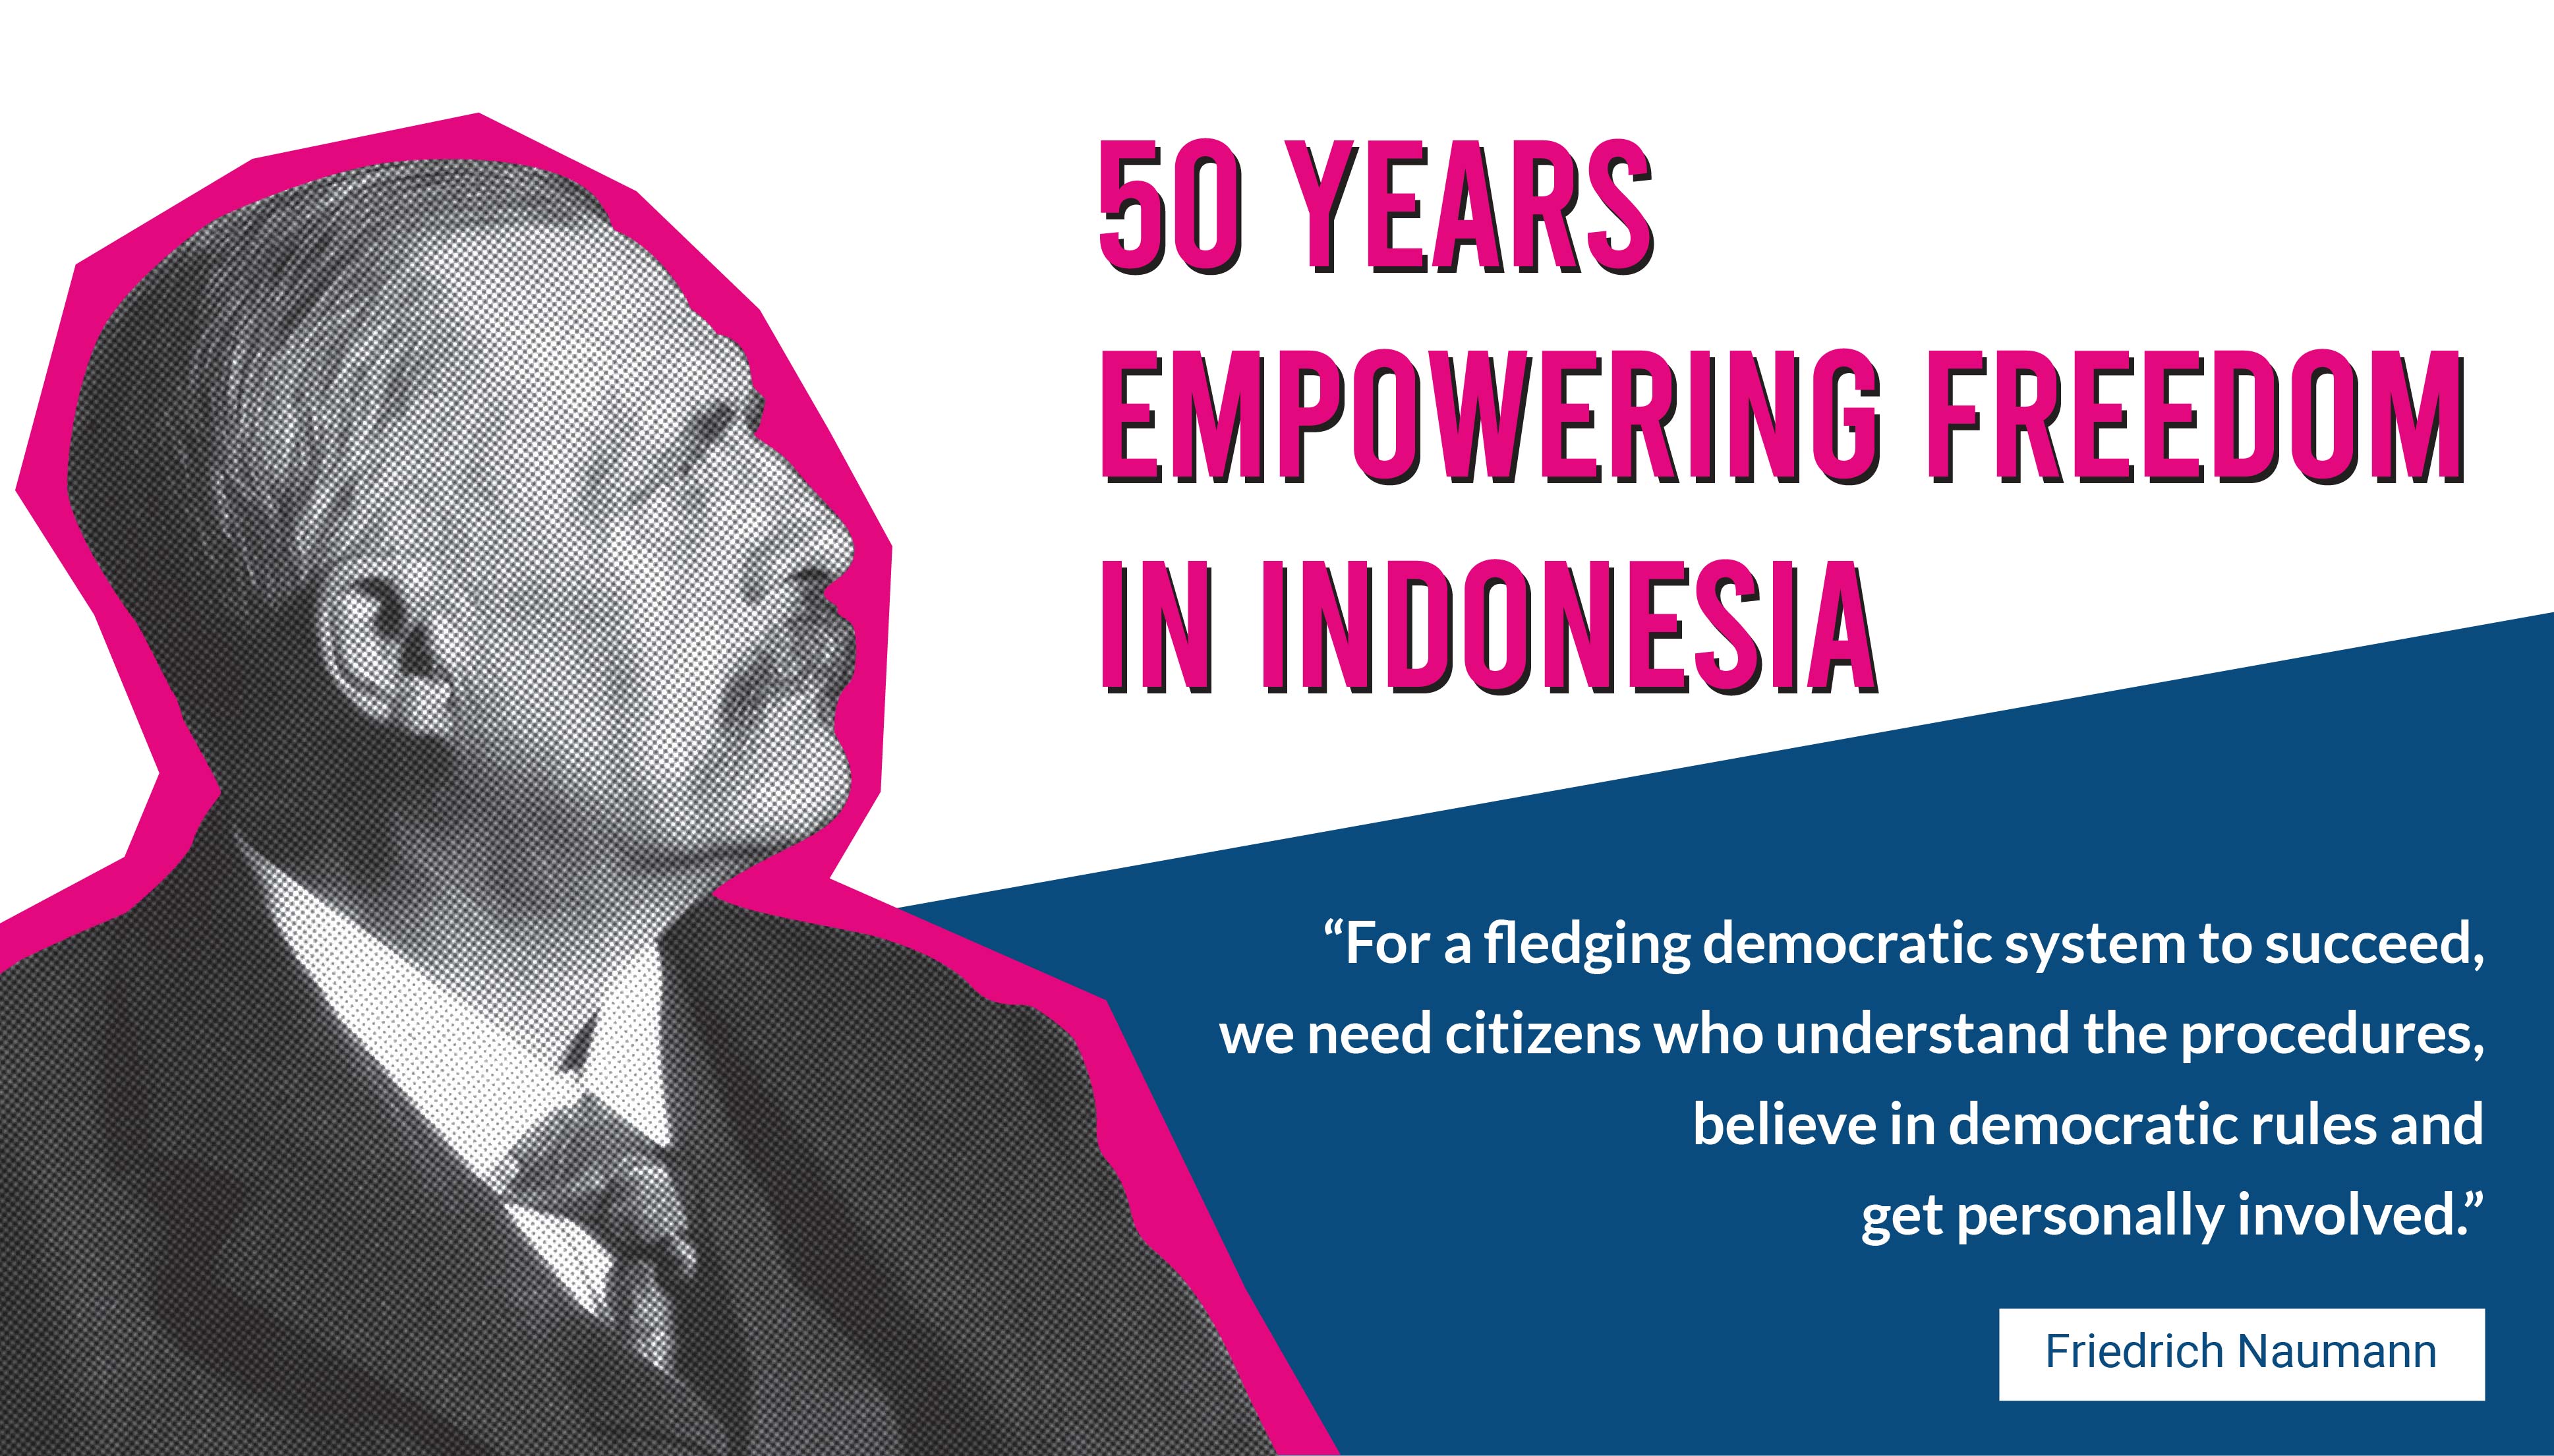 50 Years of Empowering Freedom in Indonesia